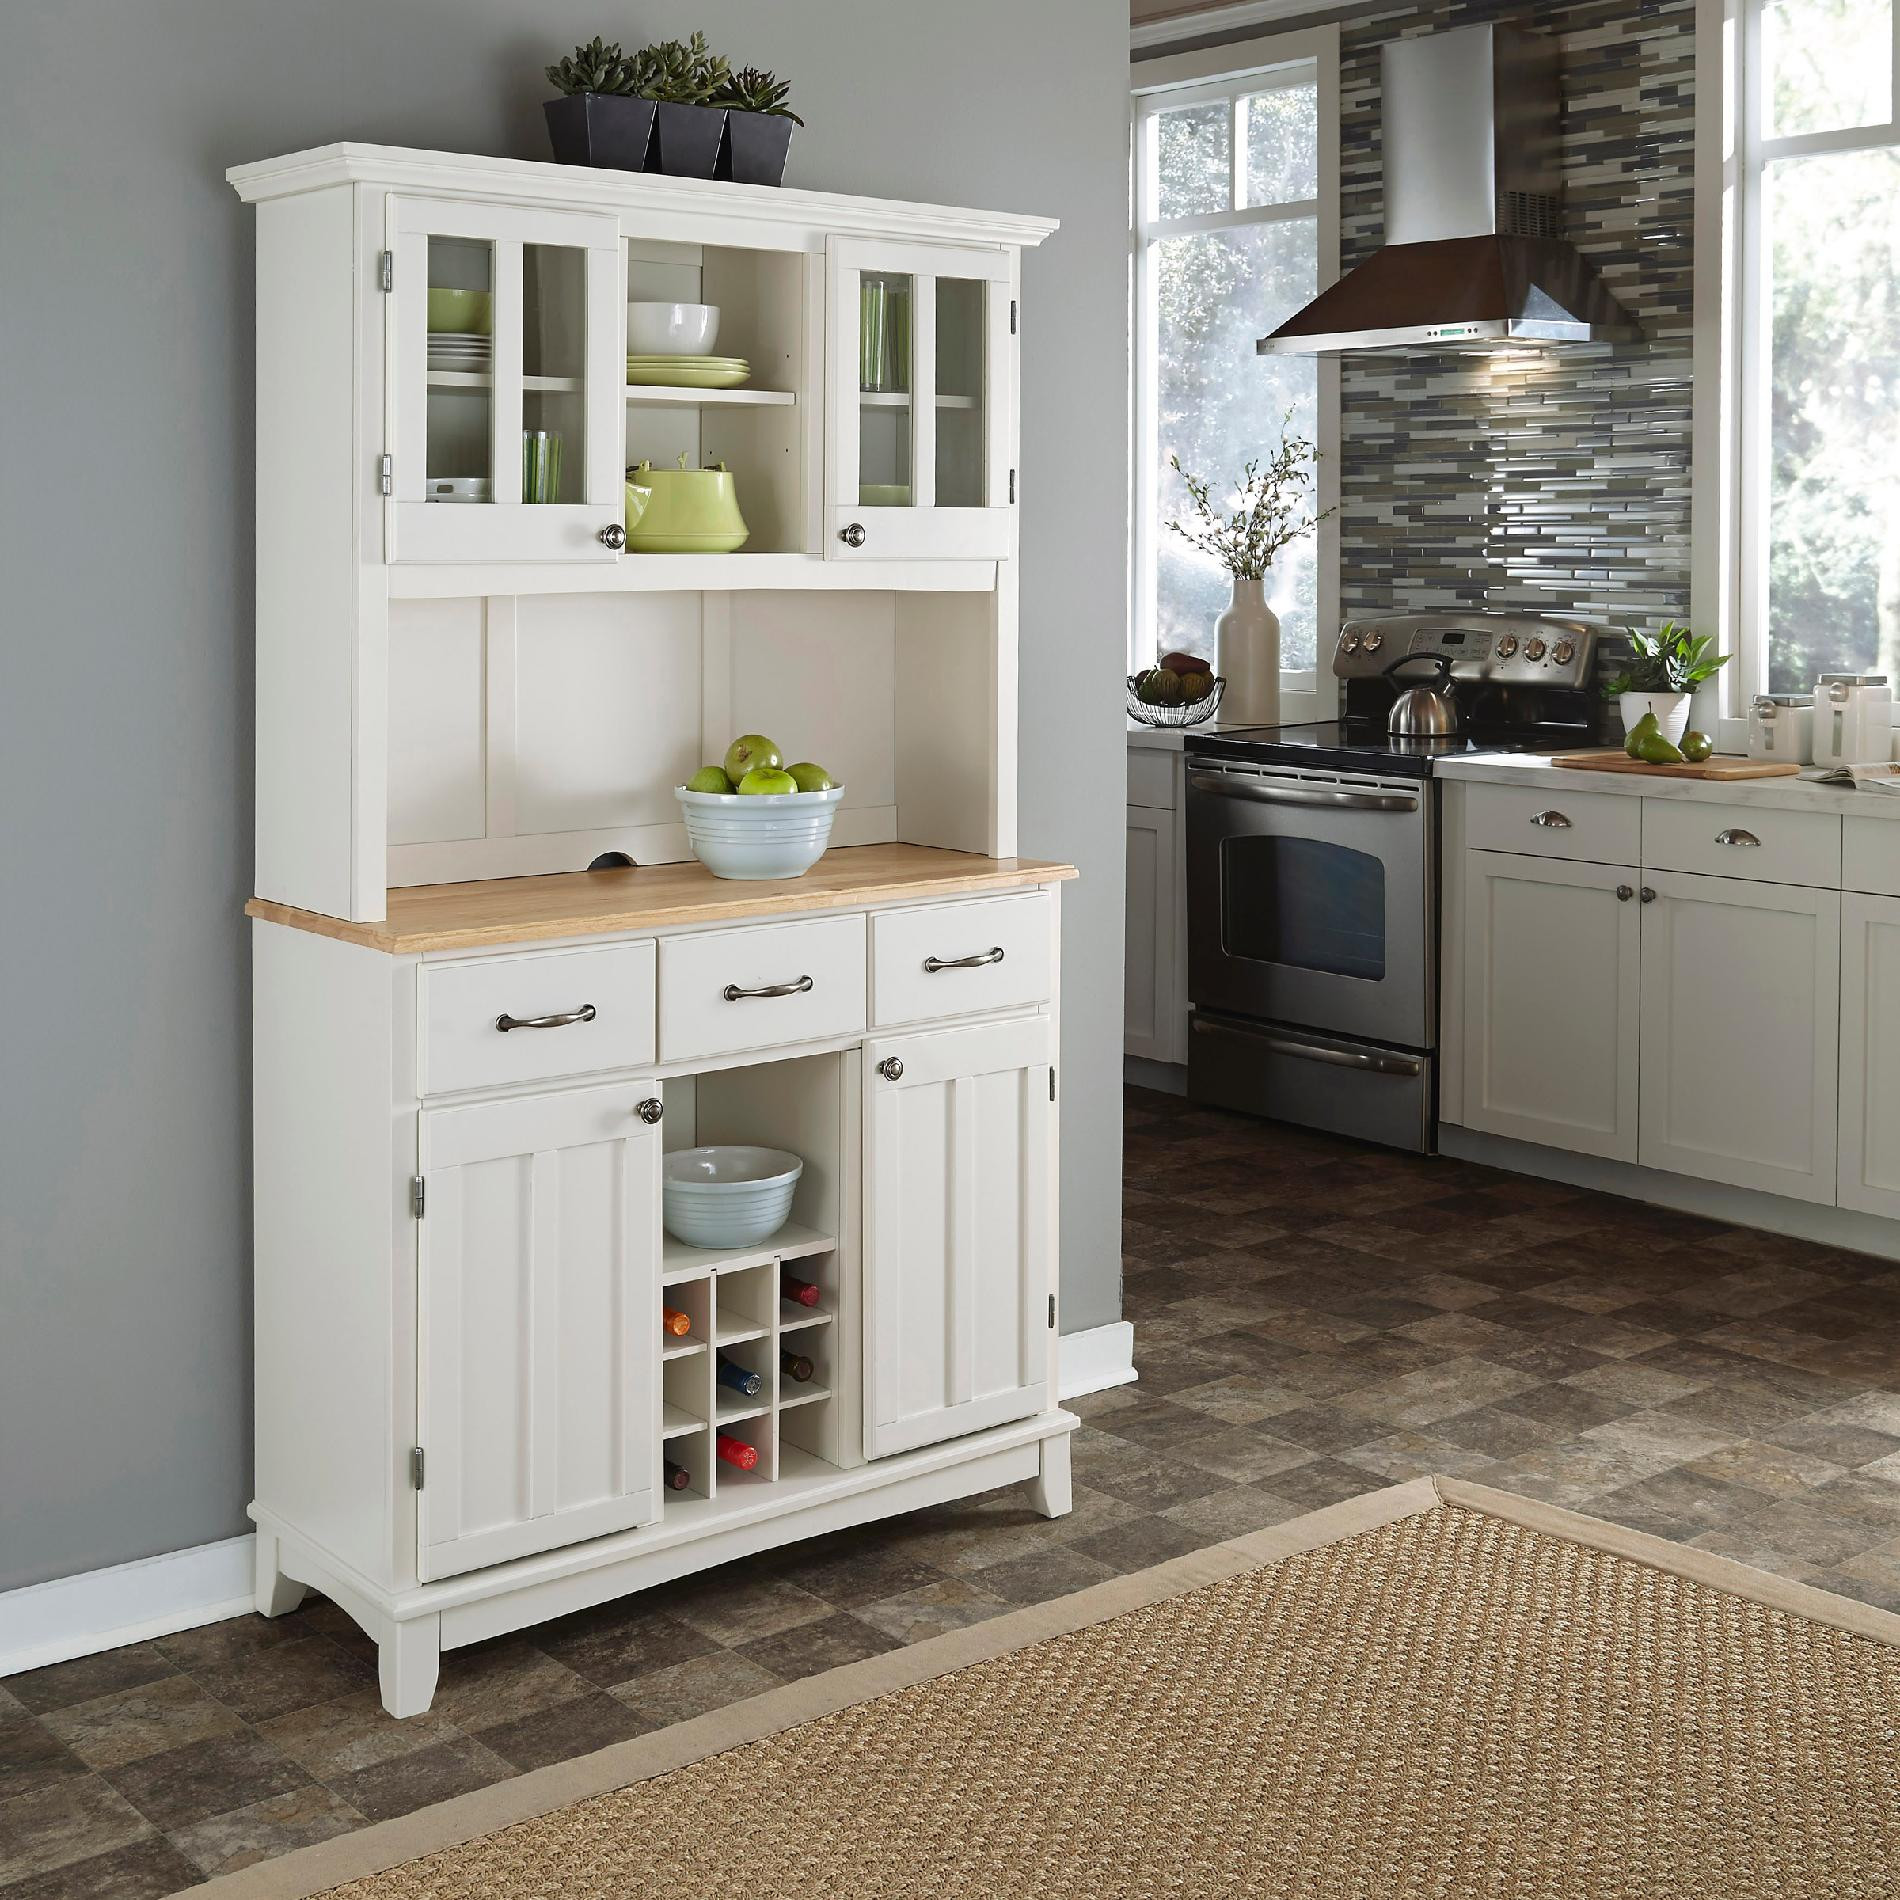 White Kitchen Buffet
 Home Styles Dining Room Buffet Hutch White